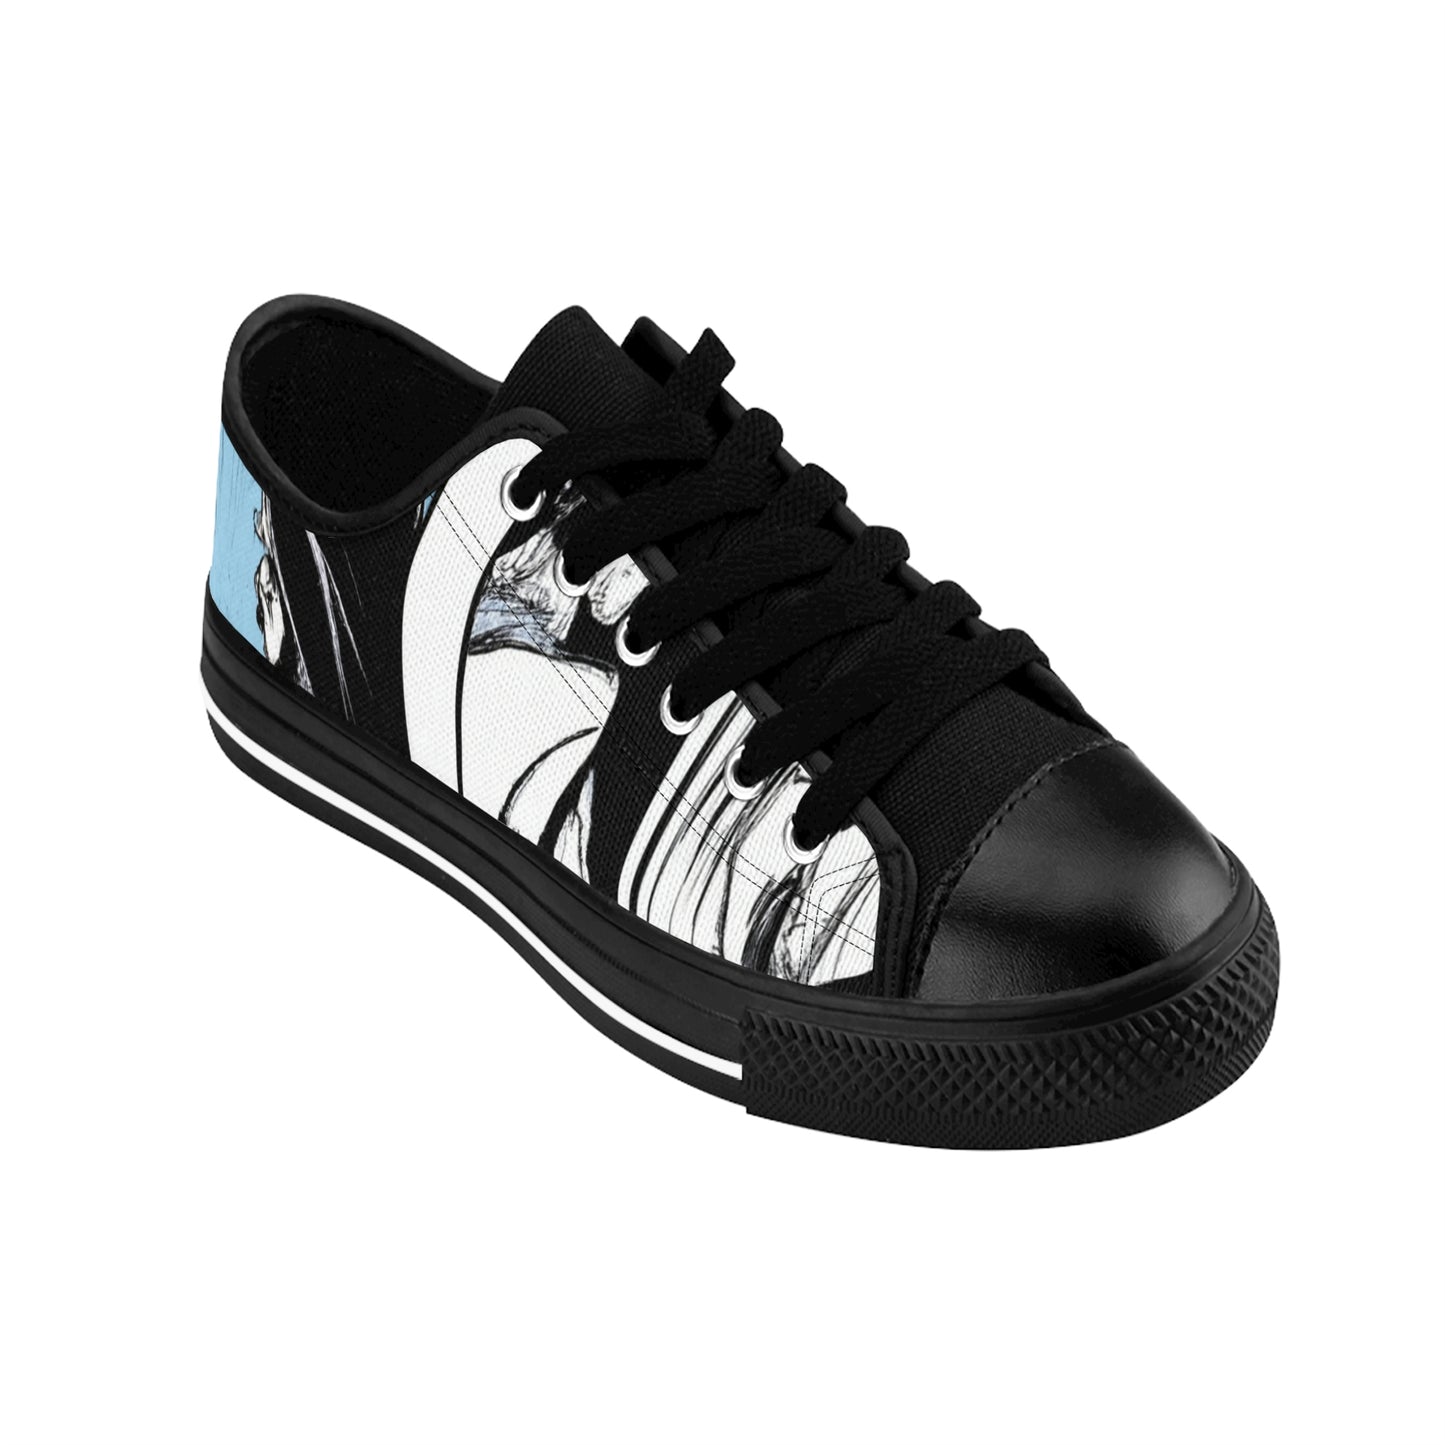 .

Anselm Le Paume - Comic Book Low Top